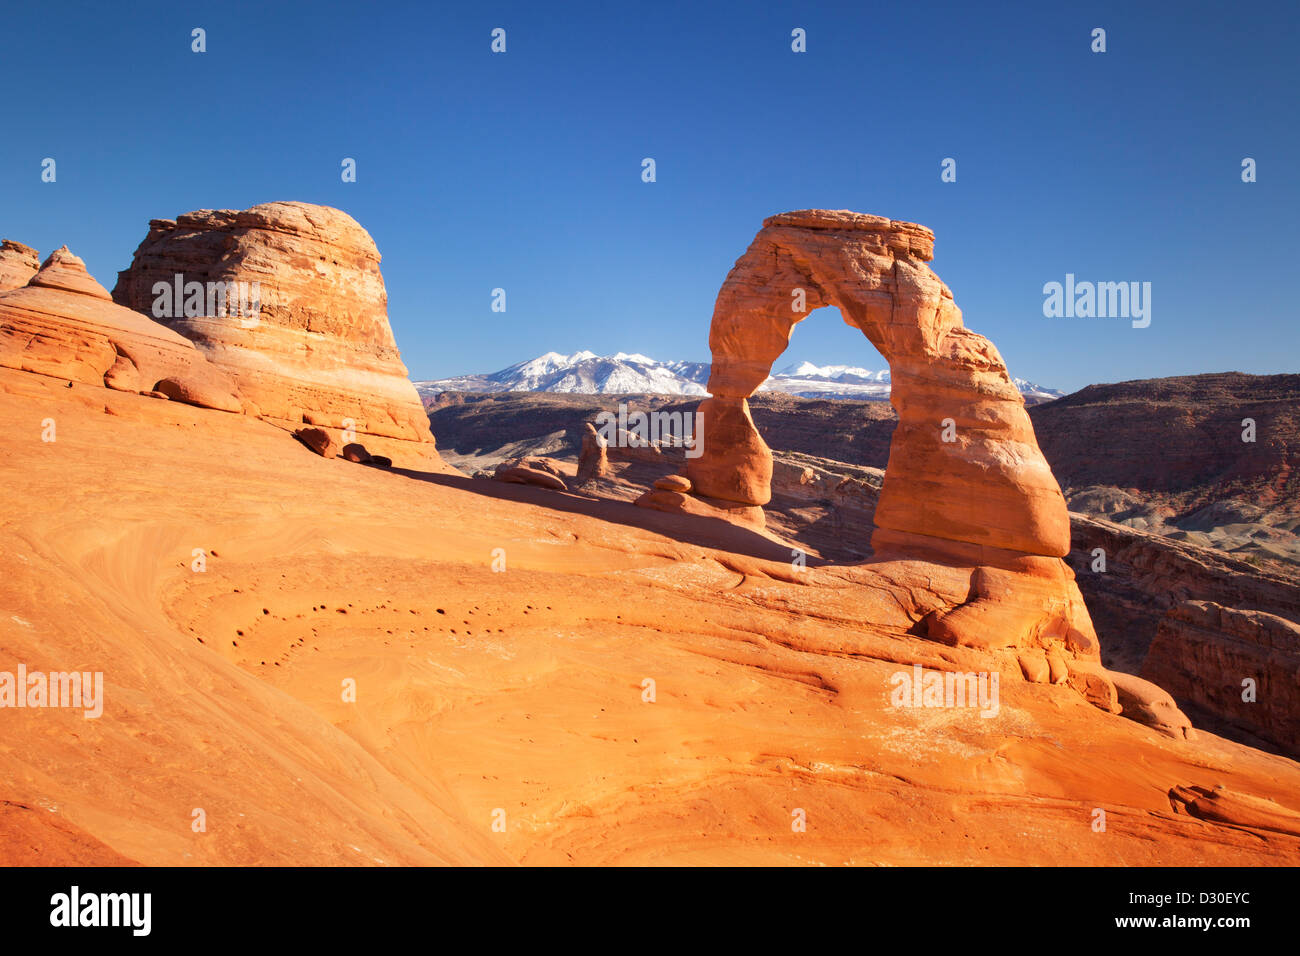 Delicate Arch with the LaSalle Mountains beyond, Arches National Park, Utah USA Stock Photo